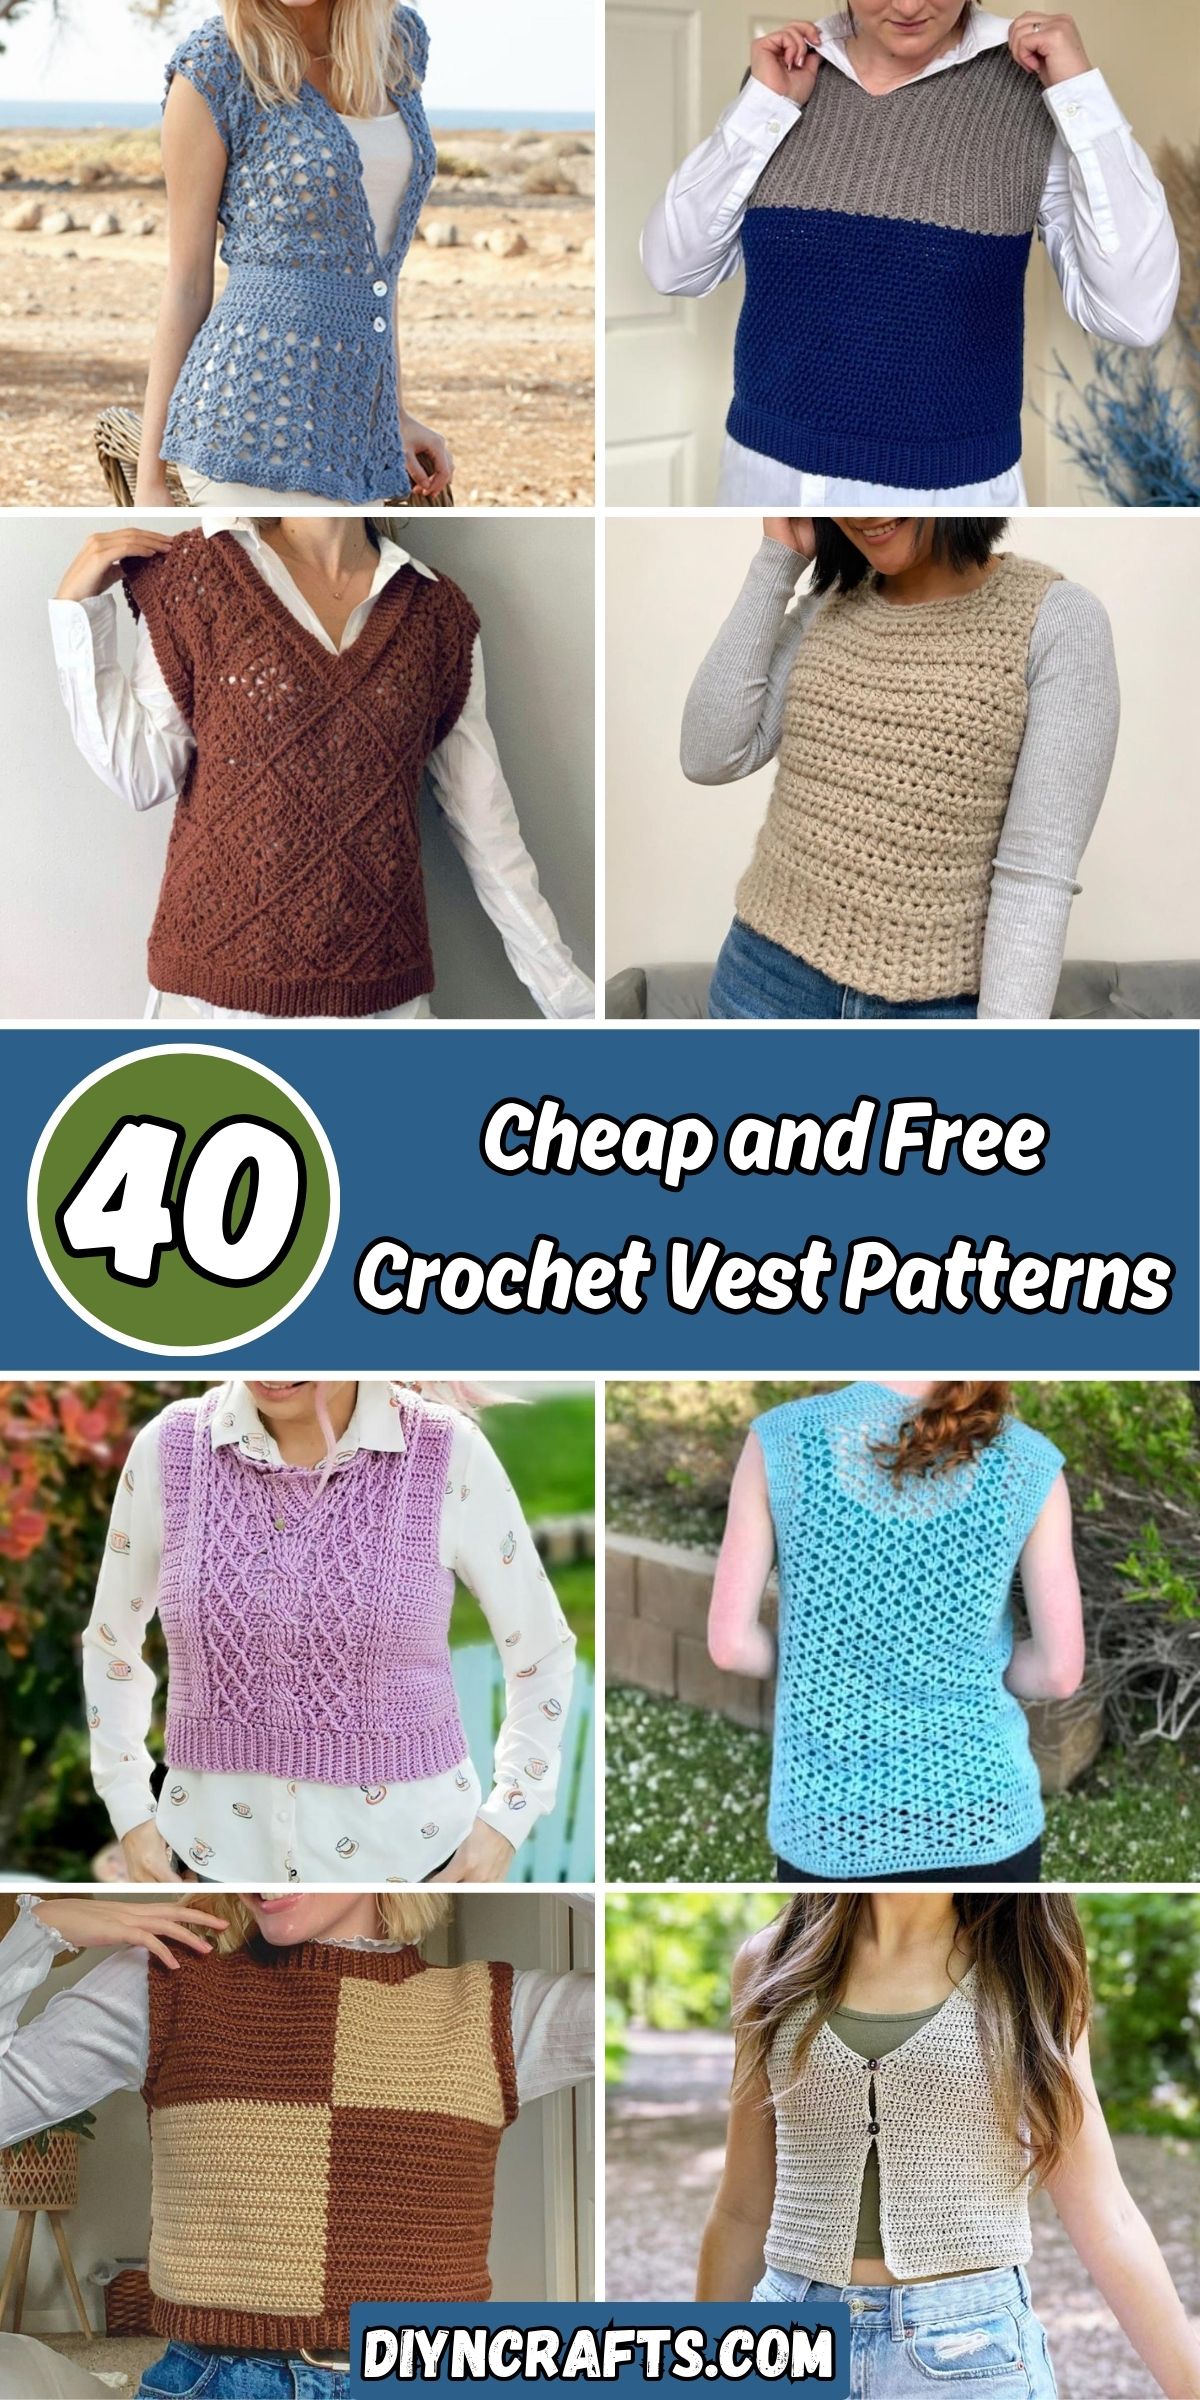 40 Cheap and Free Crochet Vest Patterns collage.